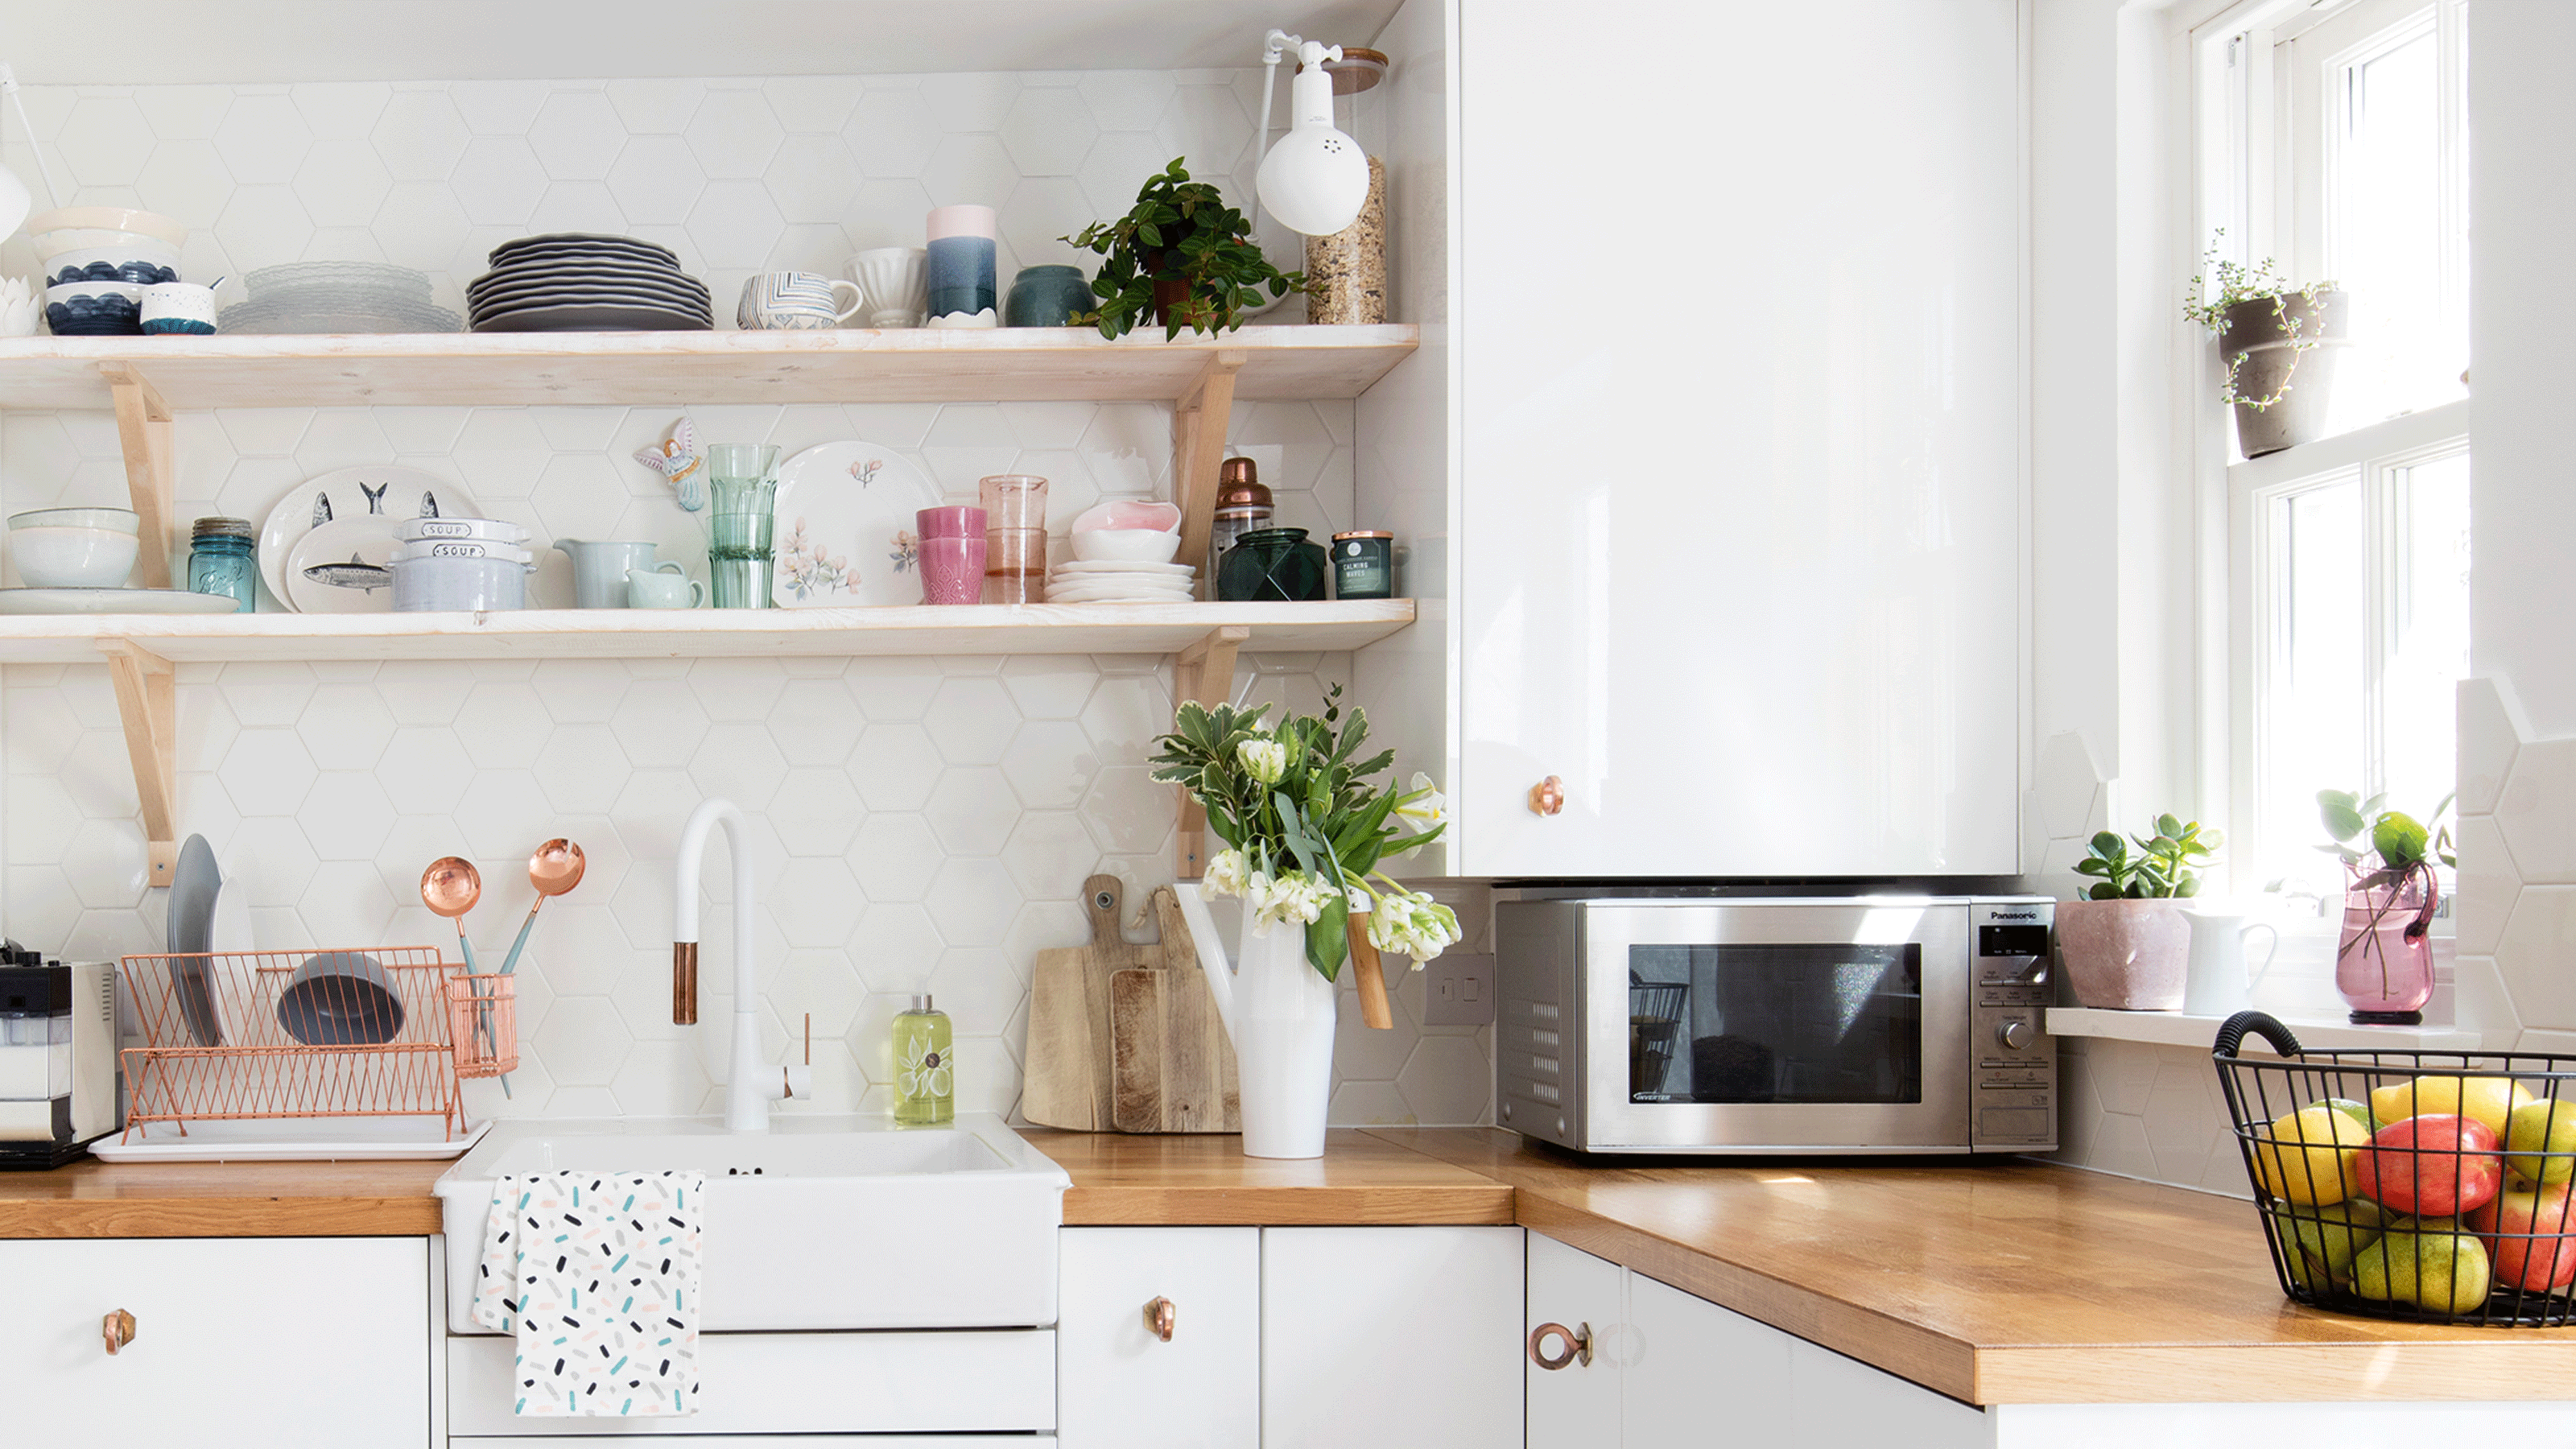 White kitchen with tiles and cooker